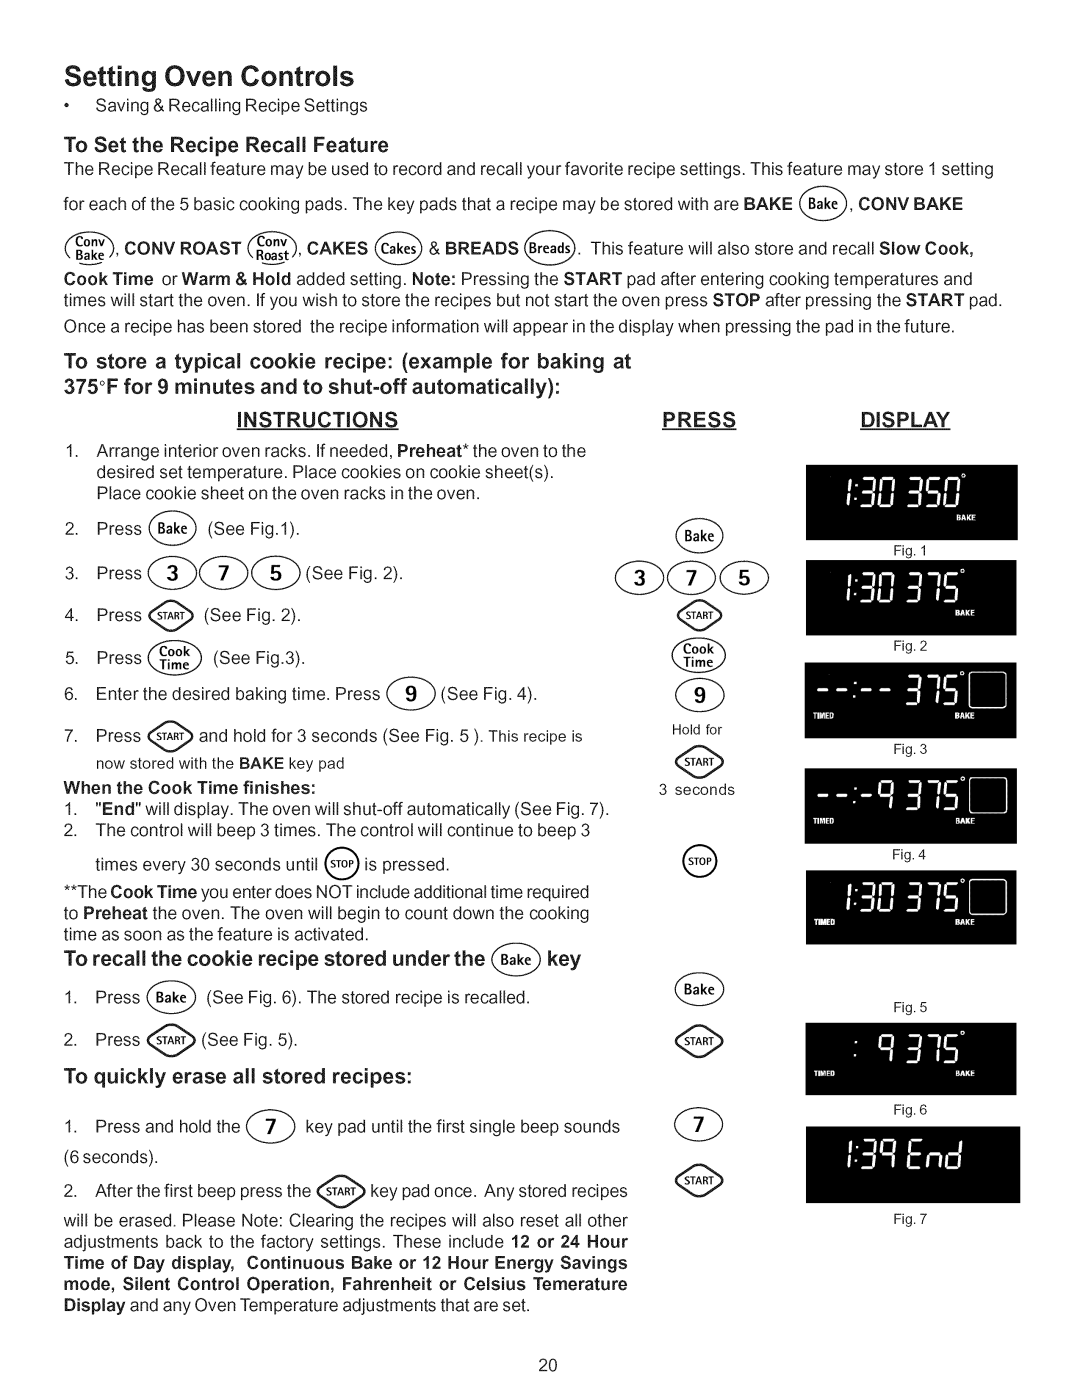 Kenmore 790.9662 manual Setting Oven Controls, To Set the Recipe Recall Feature, Instructions, Press, Display 